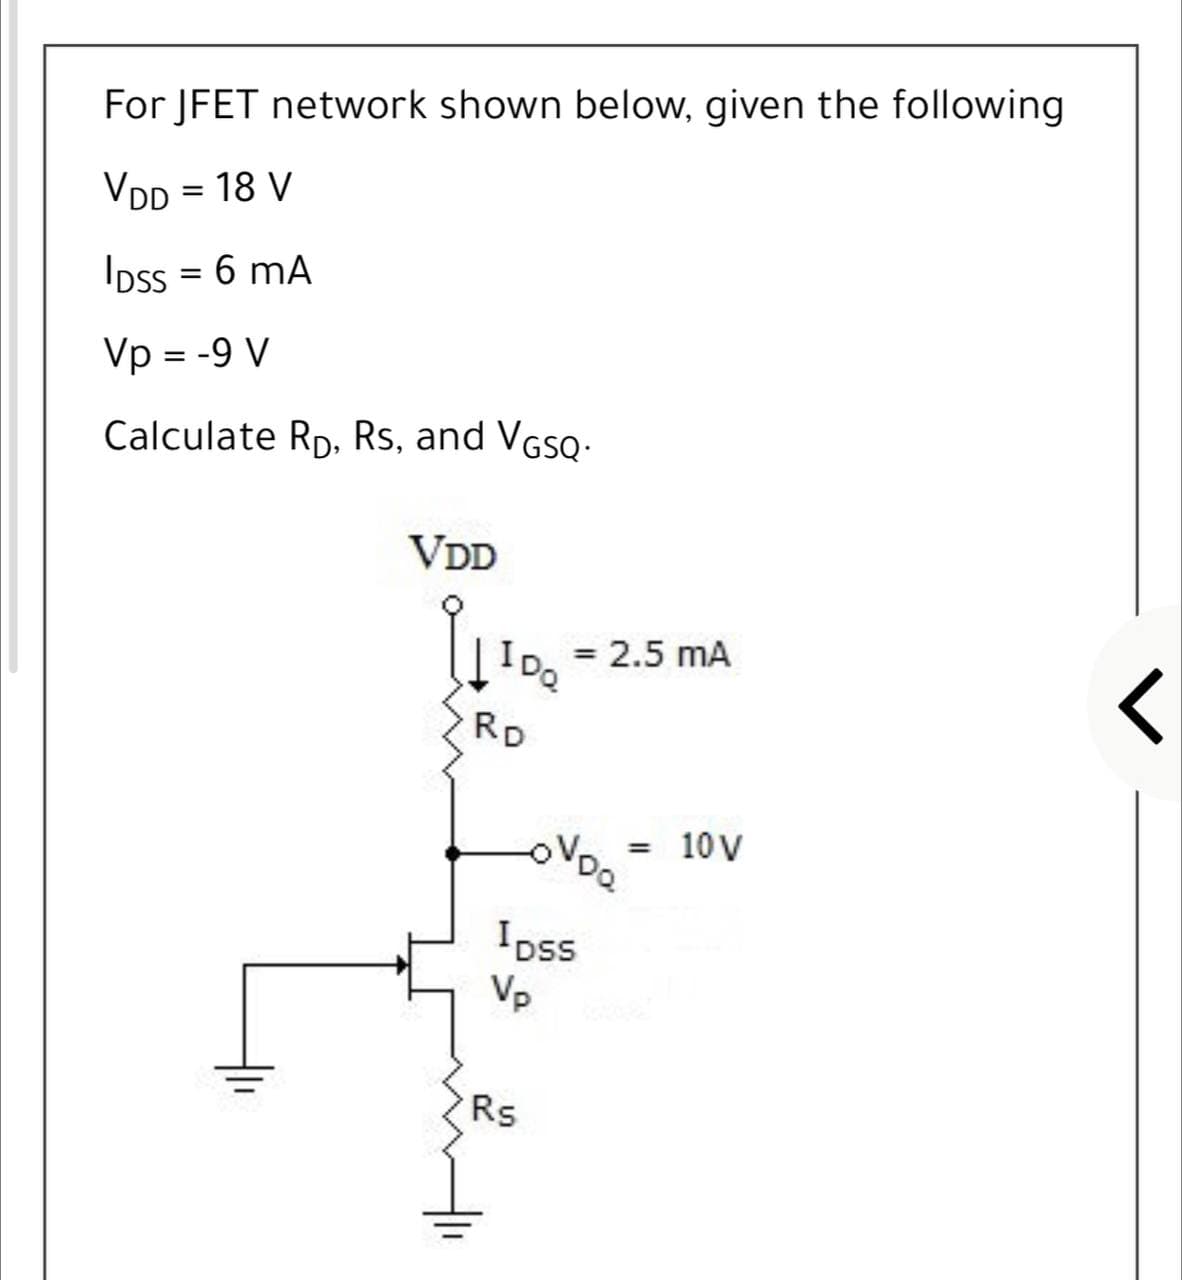 For JFET network shown below, given the following
VDD = 18 V
Ipss = 6 mA
Vp = -9 V
Calculate Rp, Rs, and VGsQ-
VDD
= 2.5 mA
IDQ
RD
10 V
Ipss
Vp
Rs
